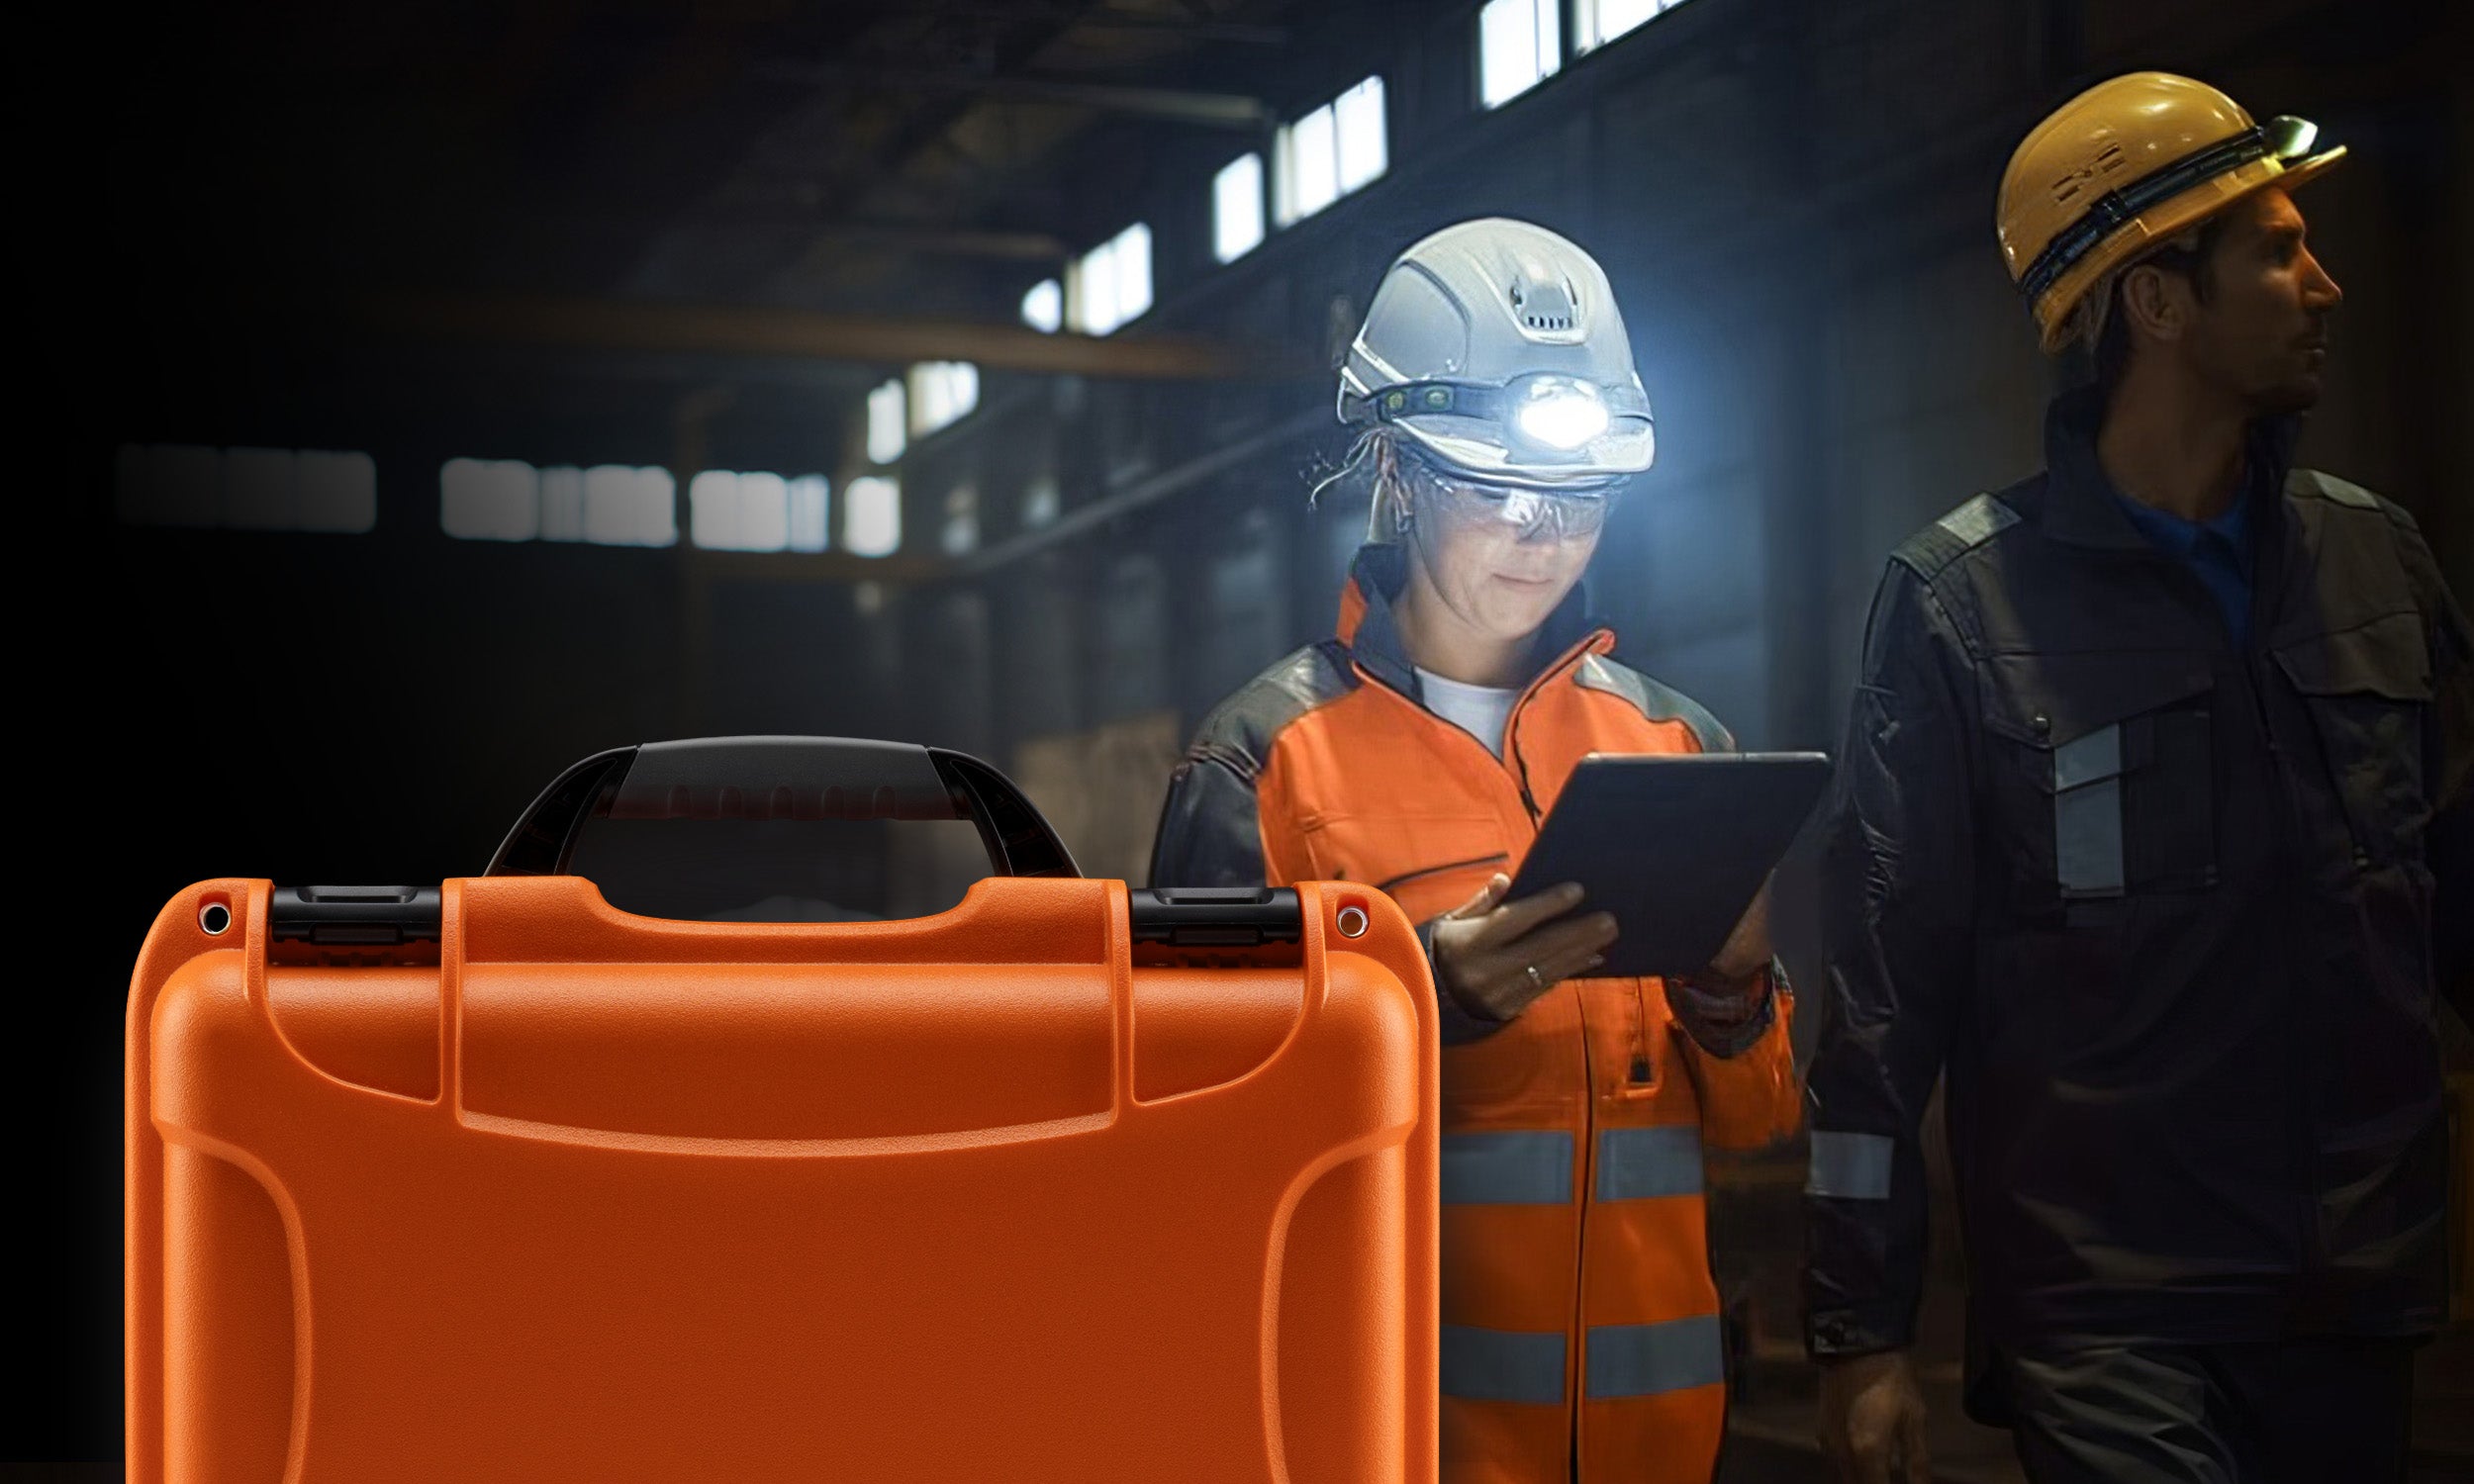 NANUK hard cases come in multiple colors, including bright options, making them suitable for dark environments or situations where high visibility is required. They are designed to stand out, ensuring equipment is easily locatable.